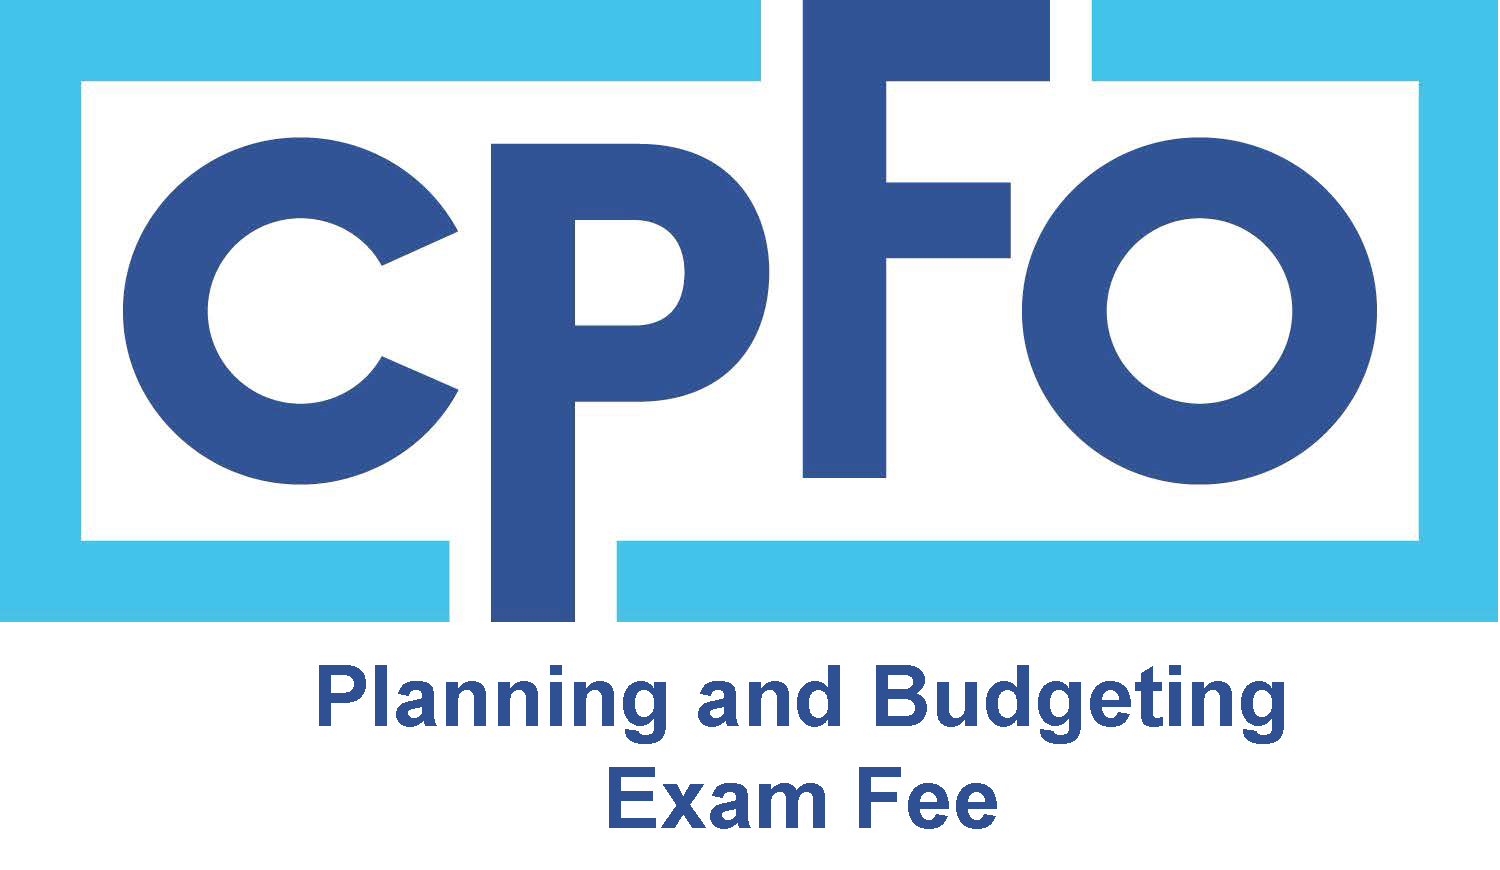 CPFO Exam Fee - Planning and Budgeting